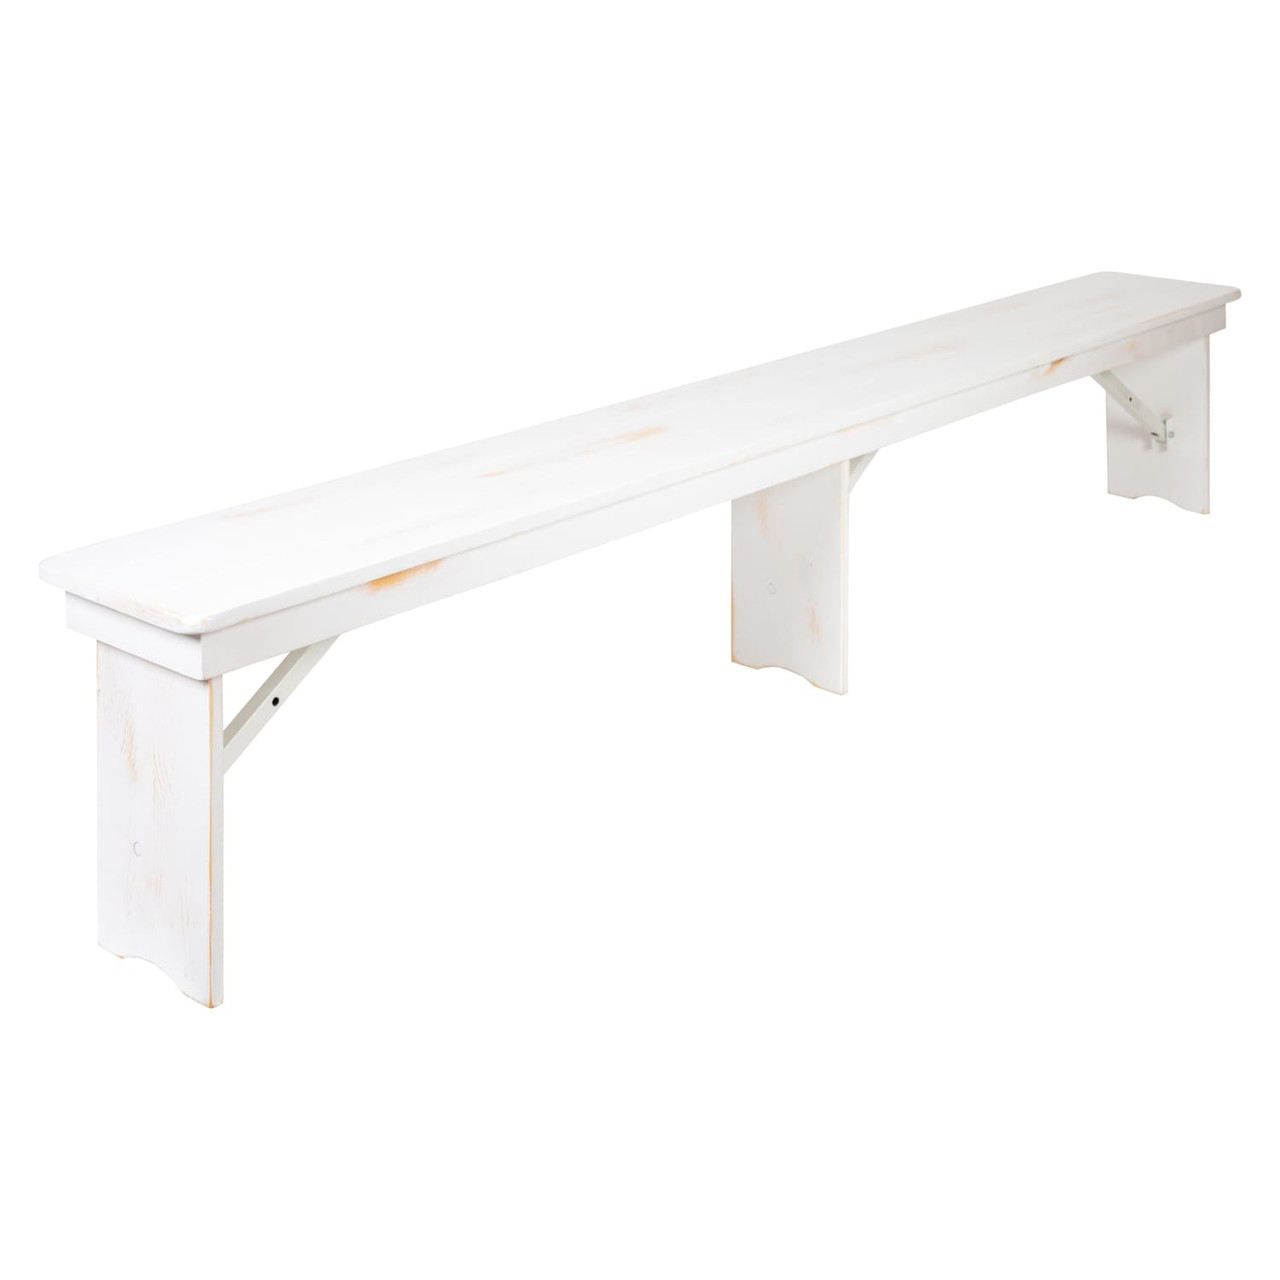 Hercules  Series 8' x 12" Antique Rustic Solid White Pine Folding Farm Bench with 3 Legs